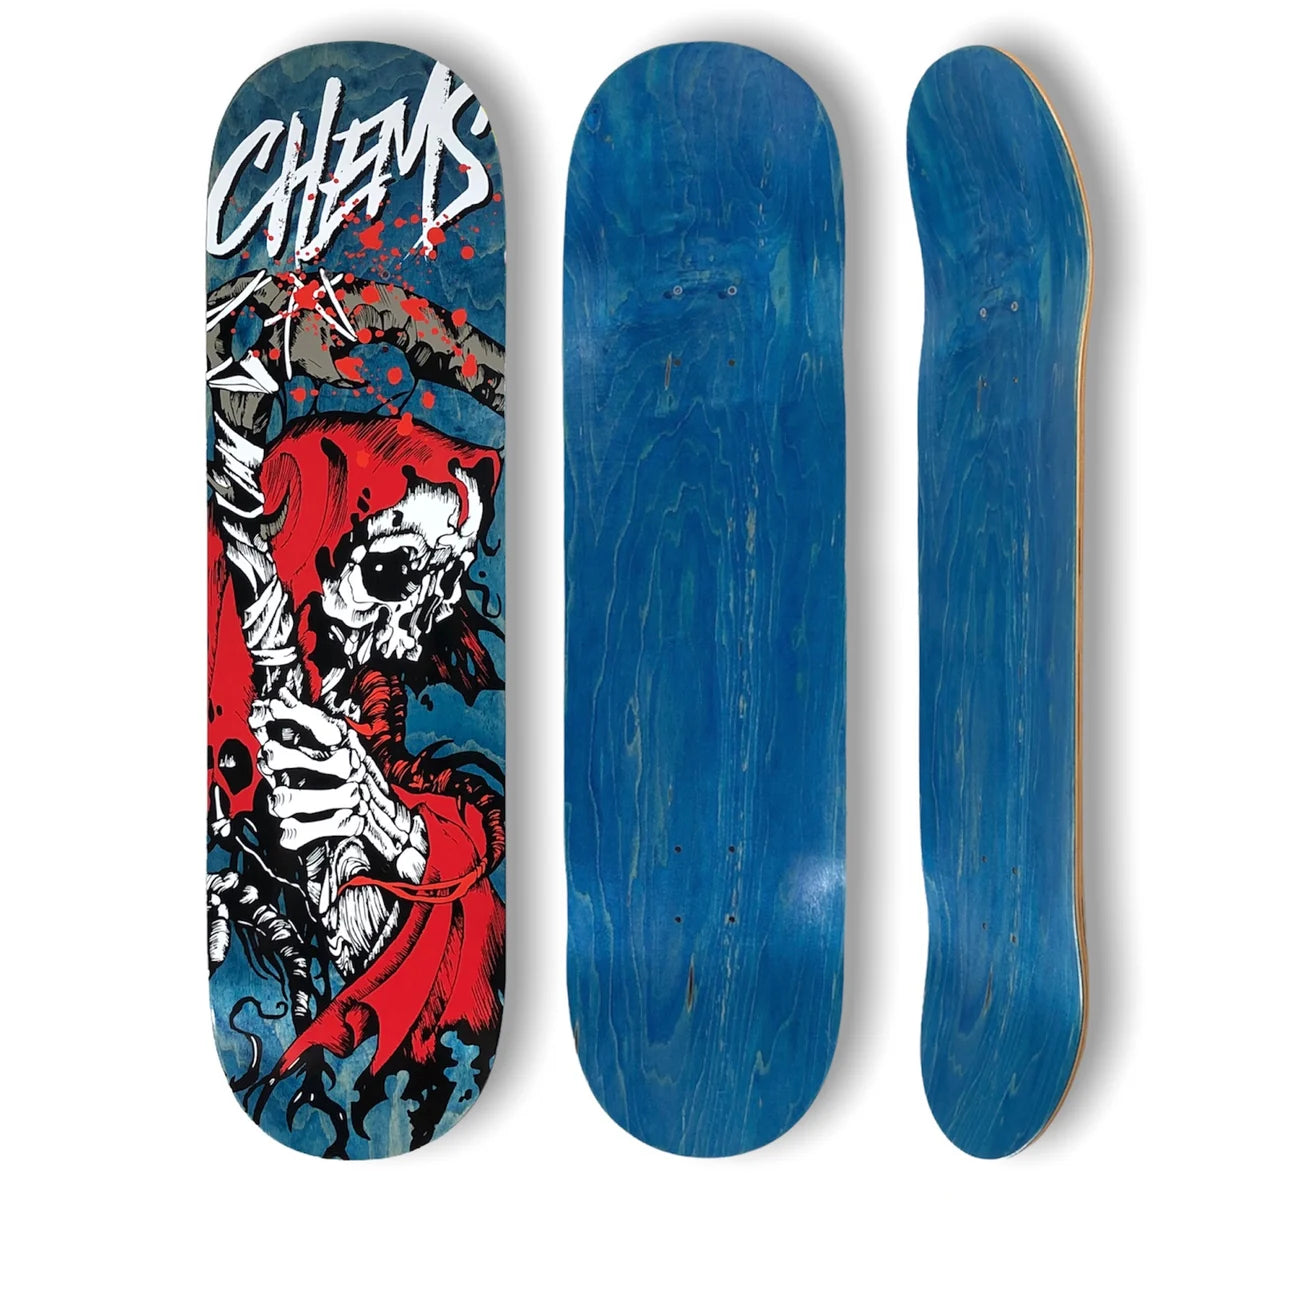 Chems Red Grim Skateboard Deck; Available in various background colors; Features a striking red grim reaper graphic; White Chems logo positioned at the top; Displayed to show the top and side of the skateboard deck